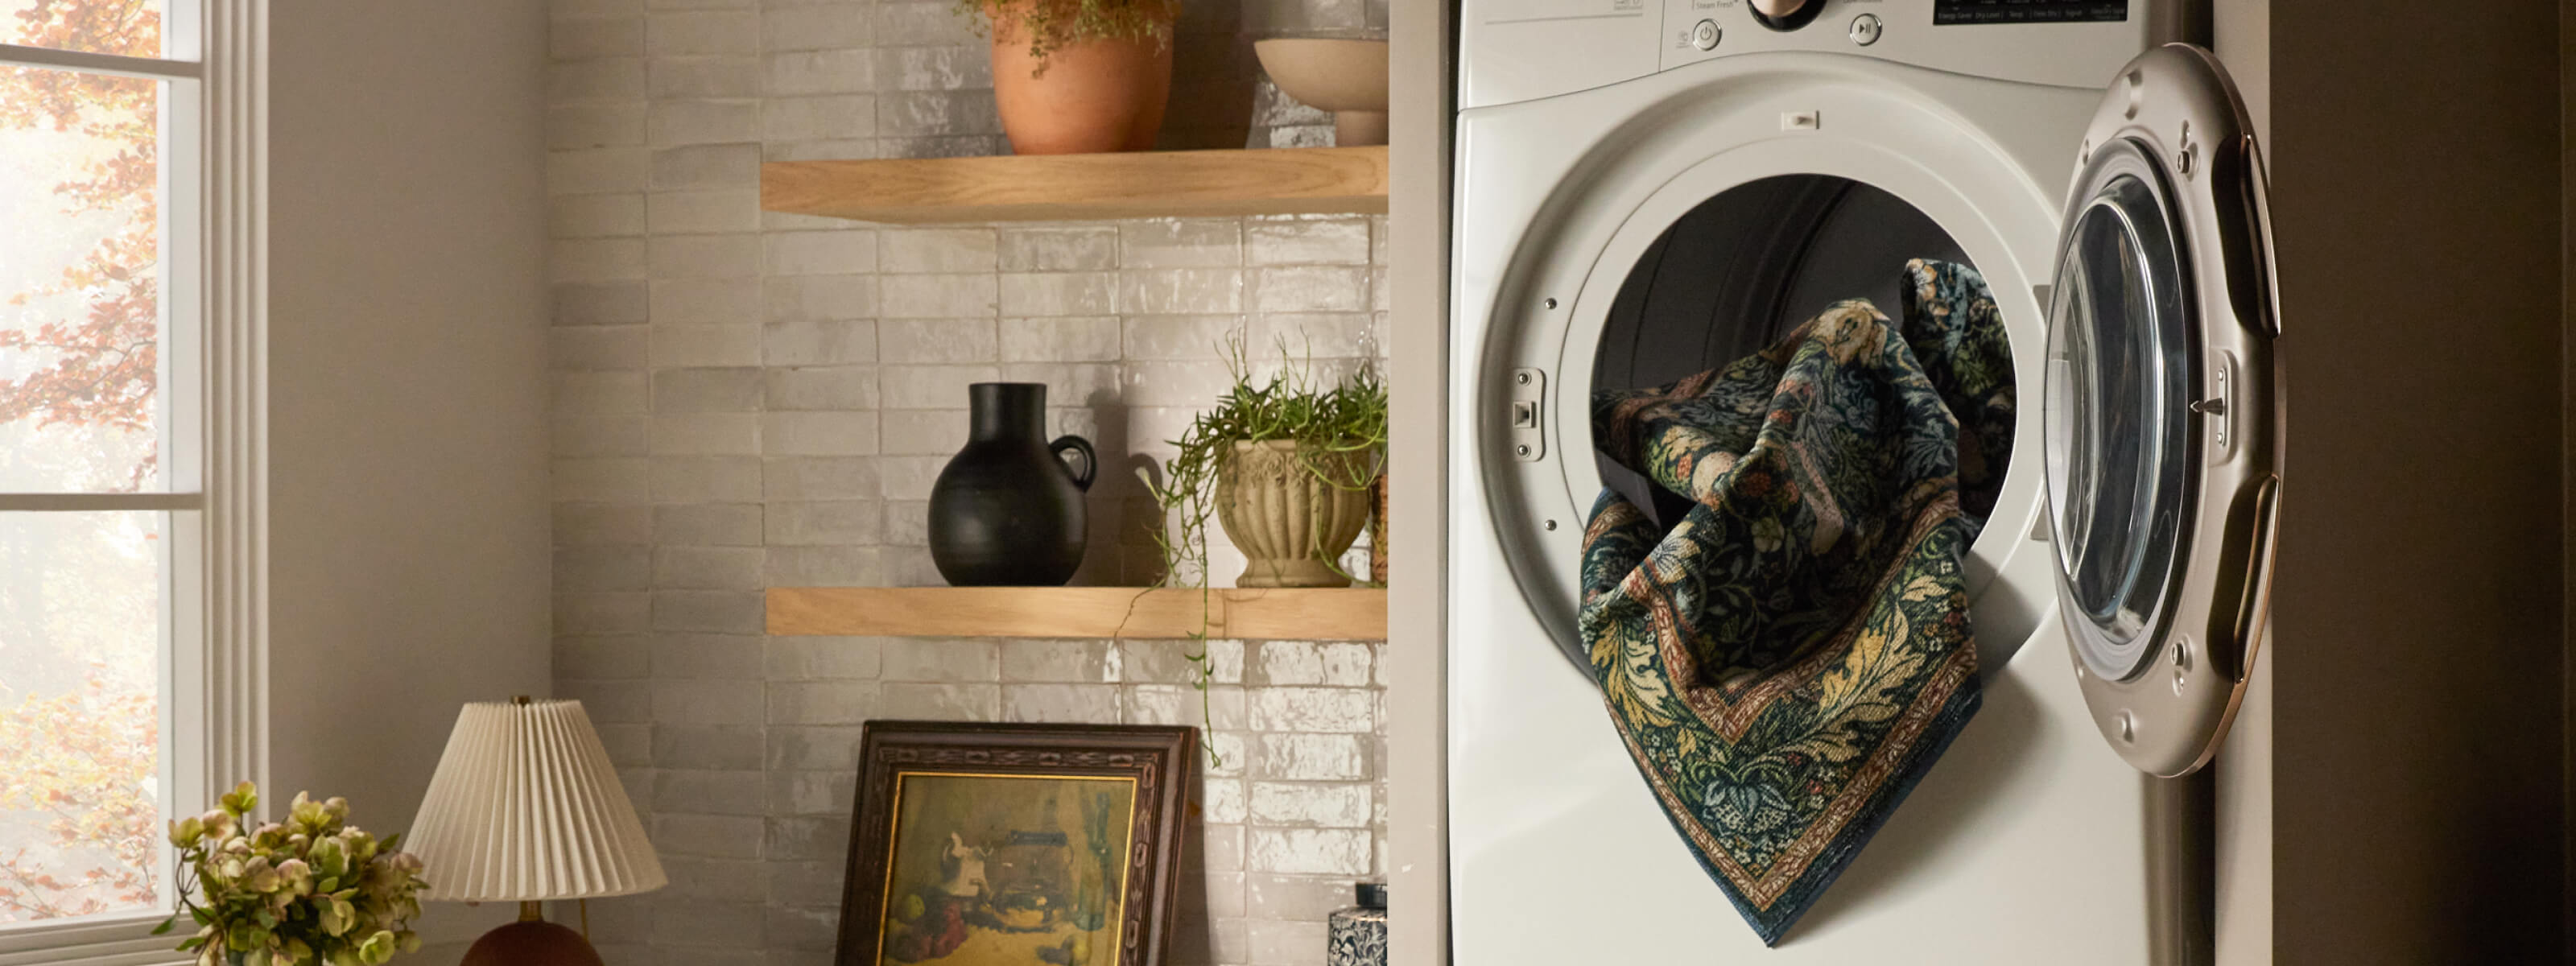 Laundry Room Rugs and Runners | Ruggable